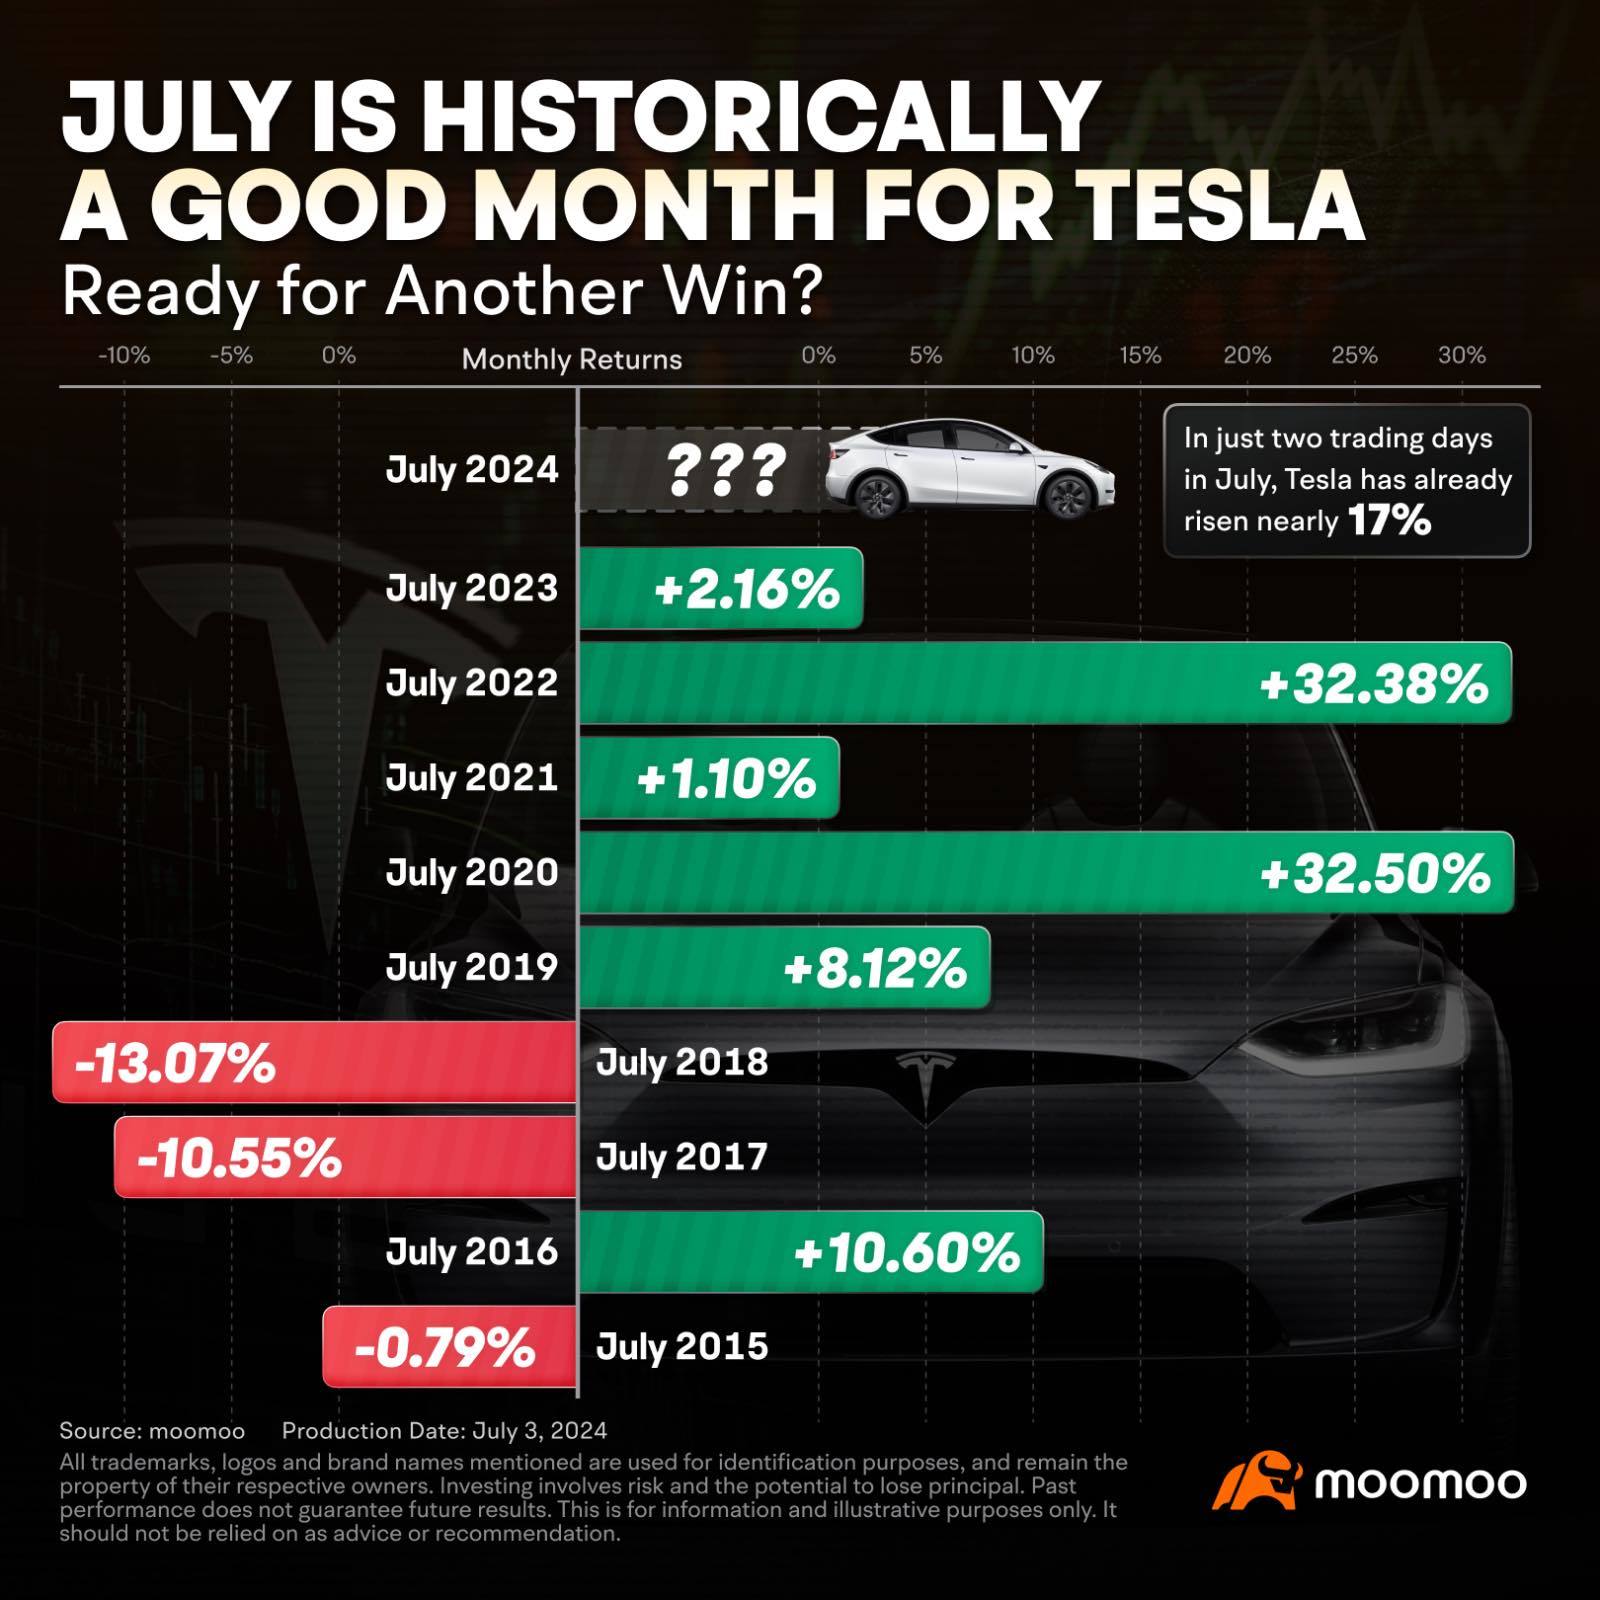 Right time to buy Tesla?